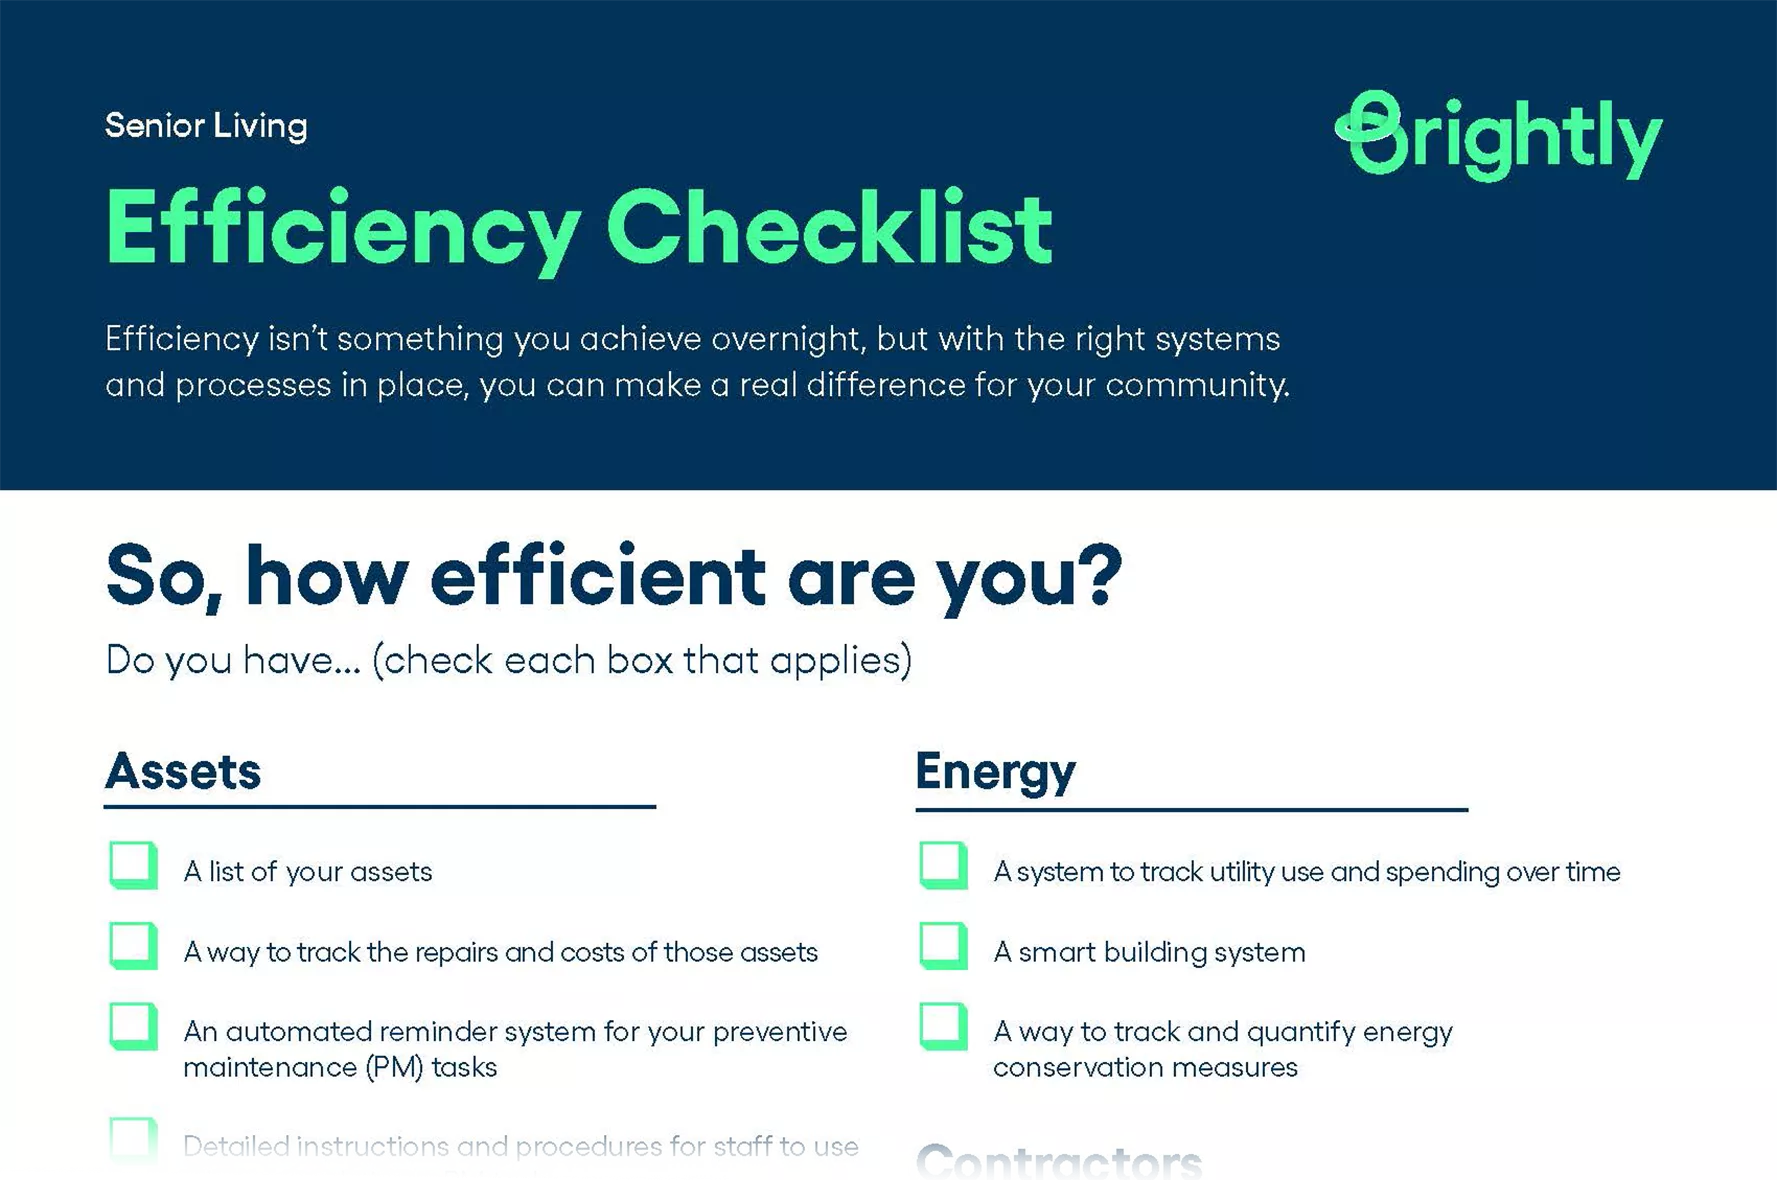 Senior Living - Efficiency Checklist - Infographic Preview